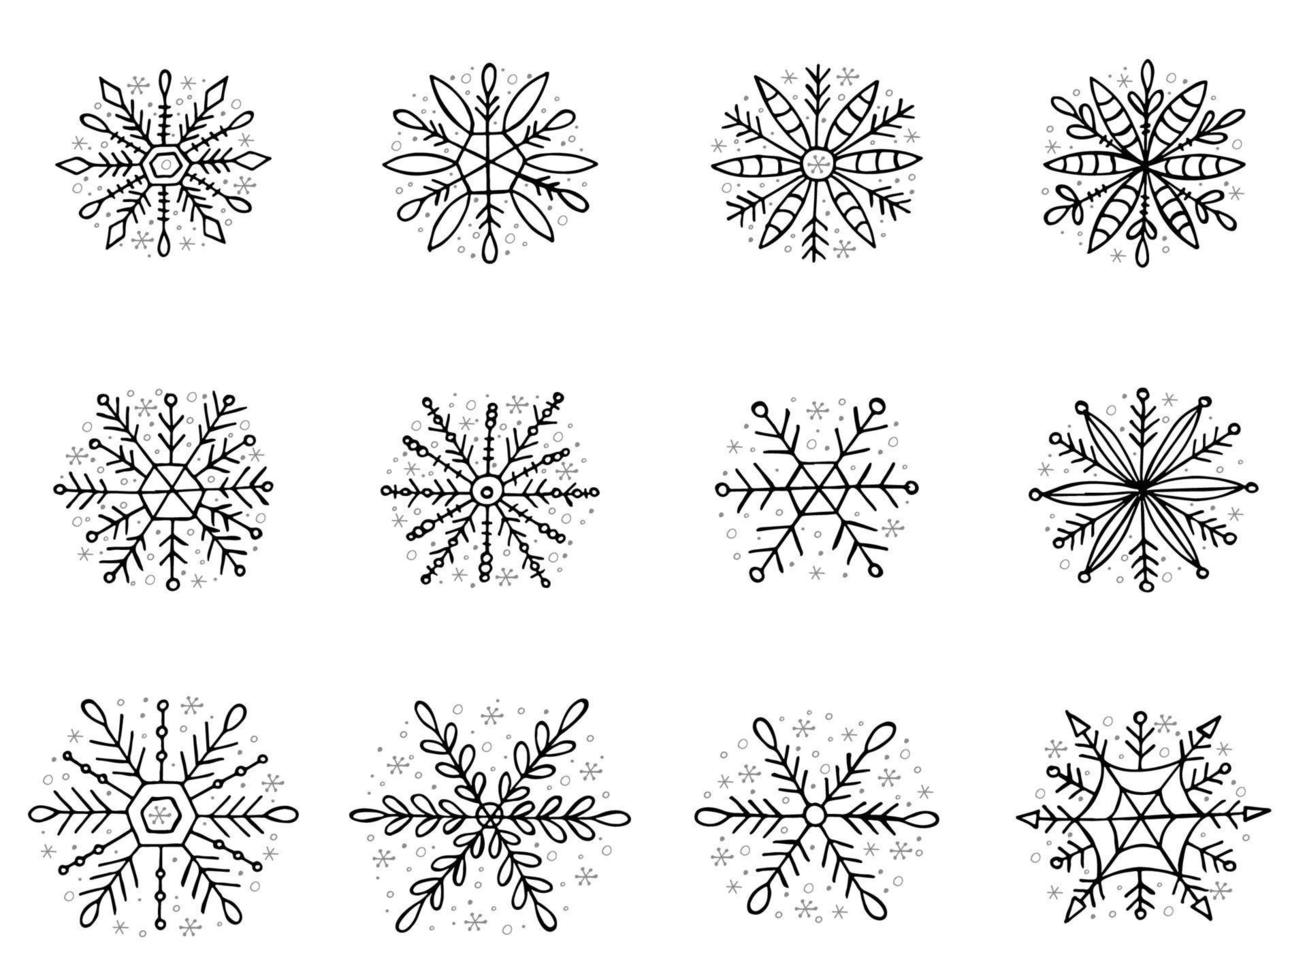 A set of hand-drawn snowflakes. Vector illustration in doodle style. Winter mood. Hello 2023. Merry Christmas and Happy New Year. Black elements on a white background.